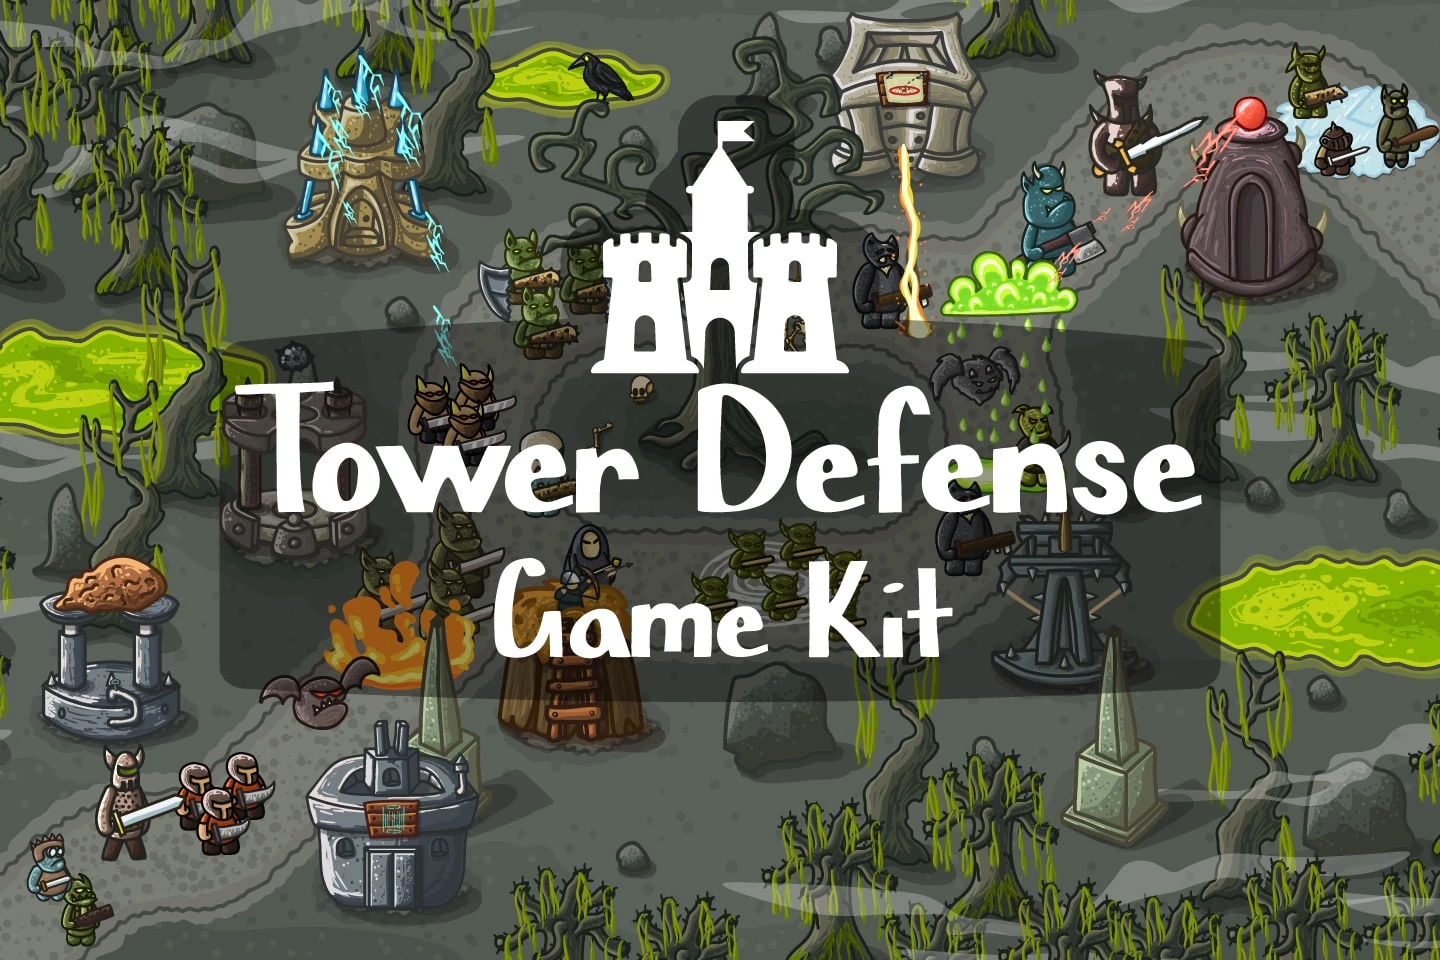 Tower Defense 2D: Play Tower Defense 2D for free